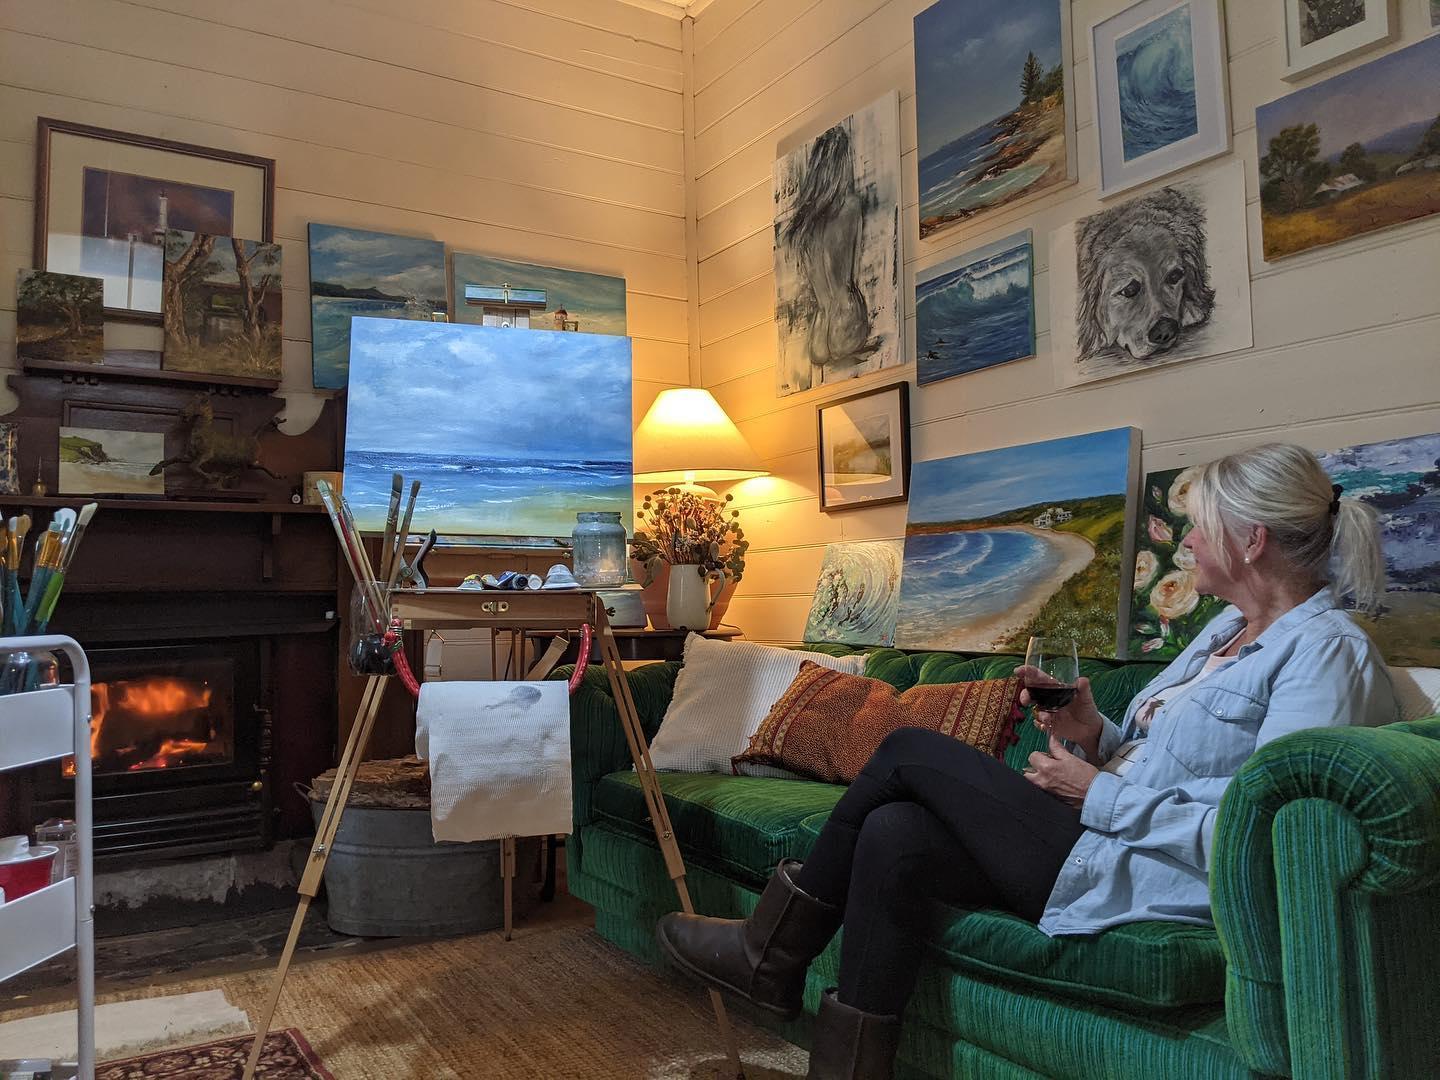 One of the many artists' studios that visitors can tour along the Surf Coast Arts Trail in the Surf Coast Shire Victoria